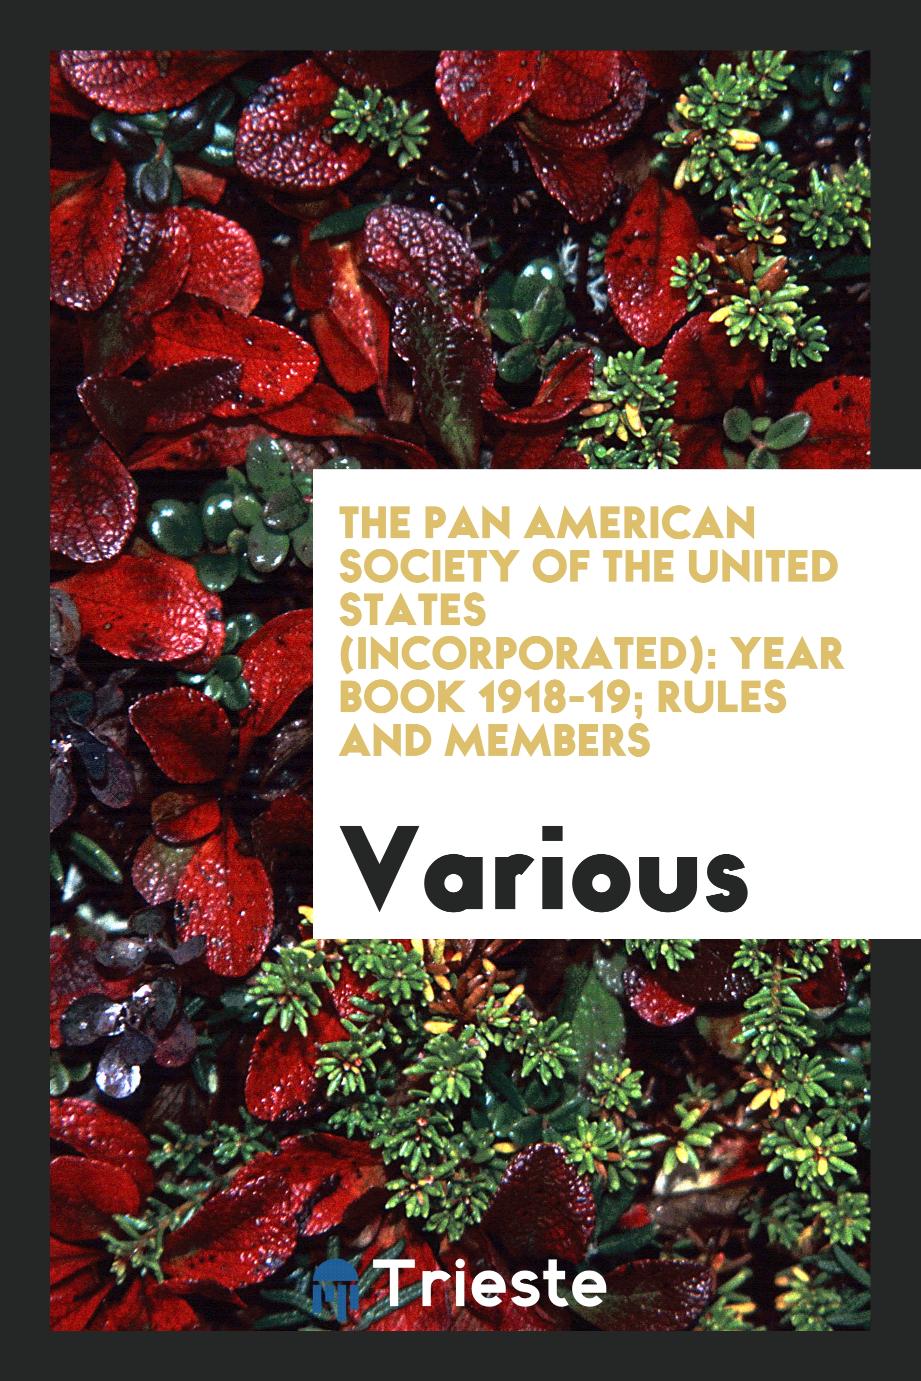 The Pan American Society of the United States (incorporated): Year book 1918-19; Rules and Members